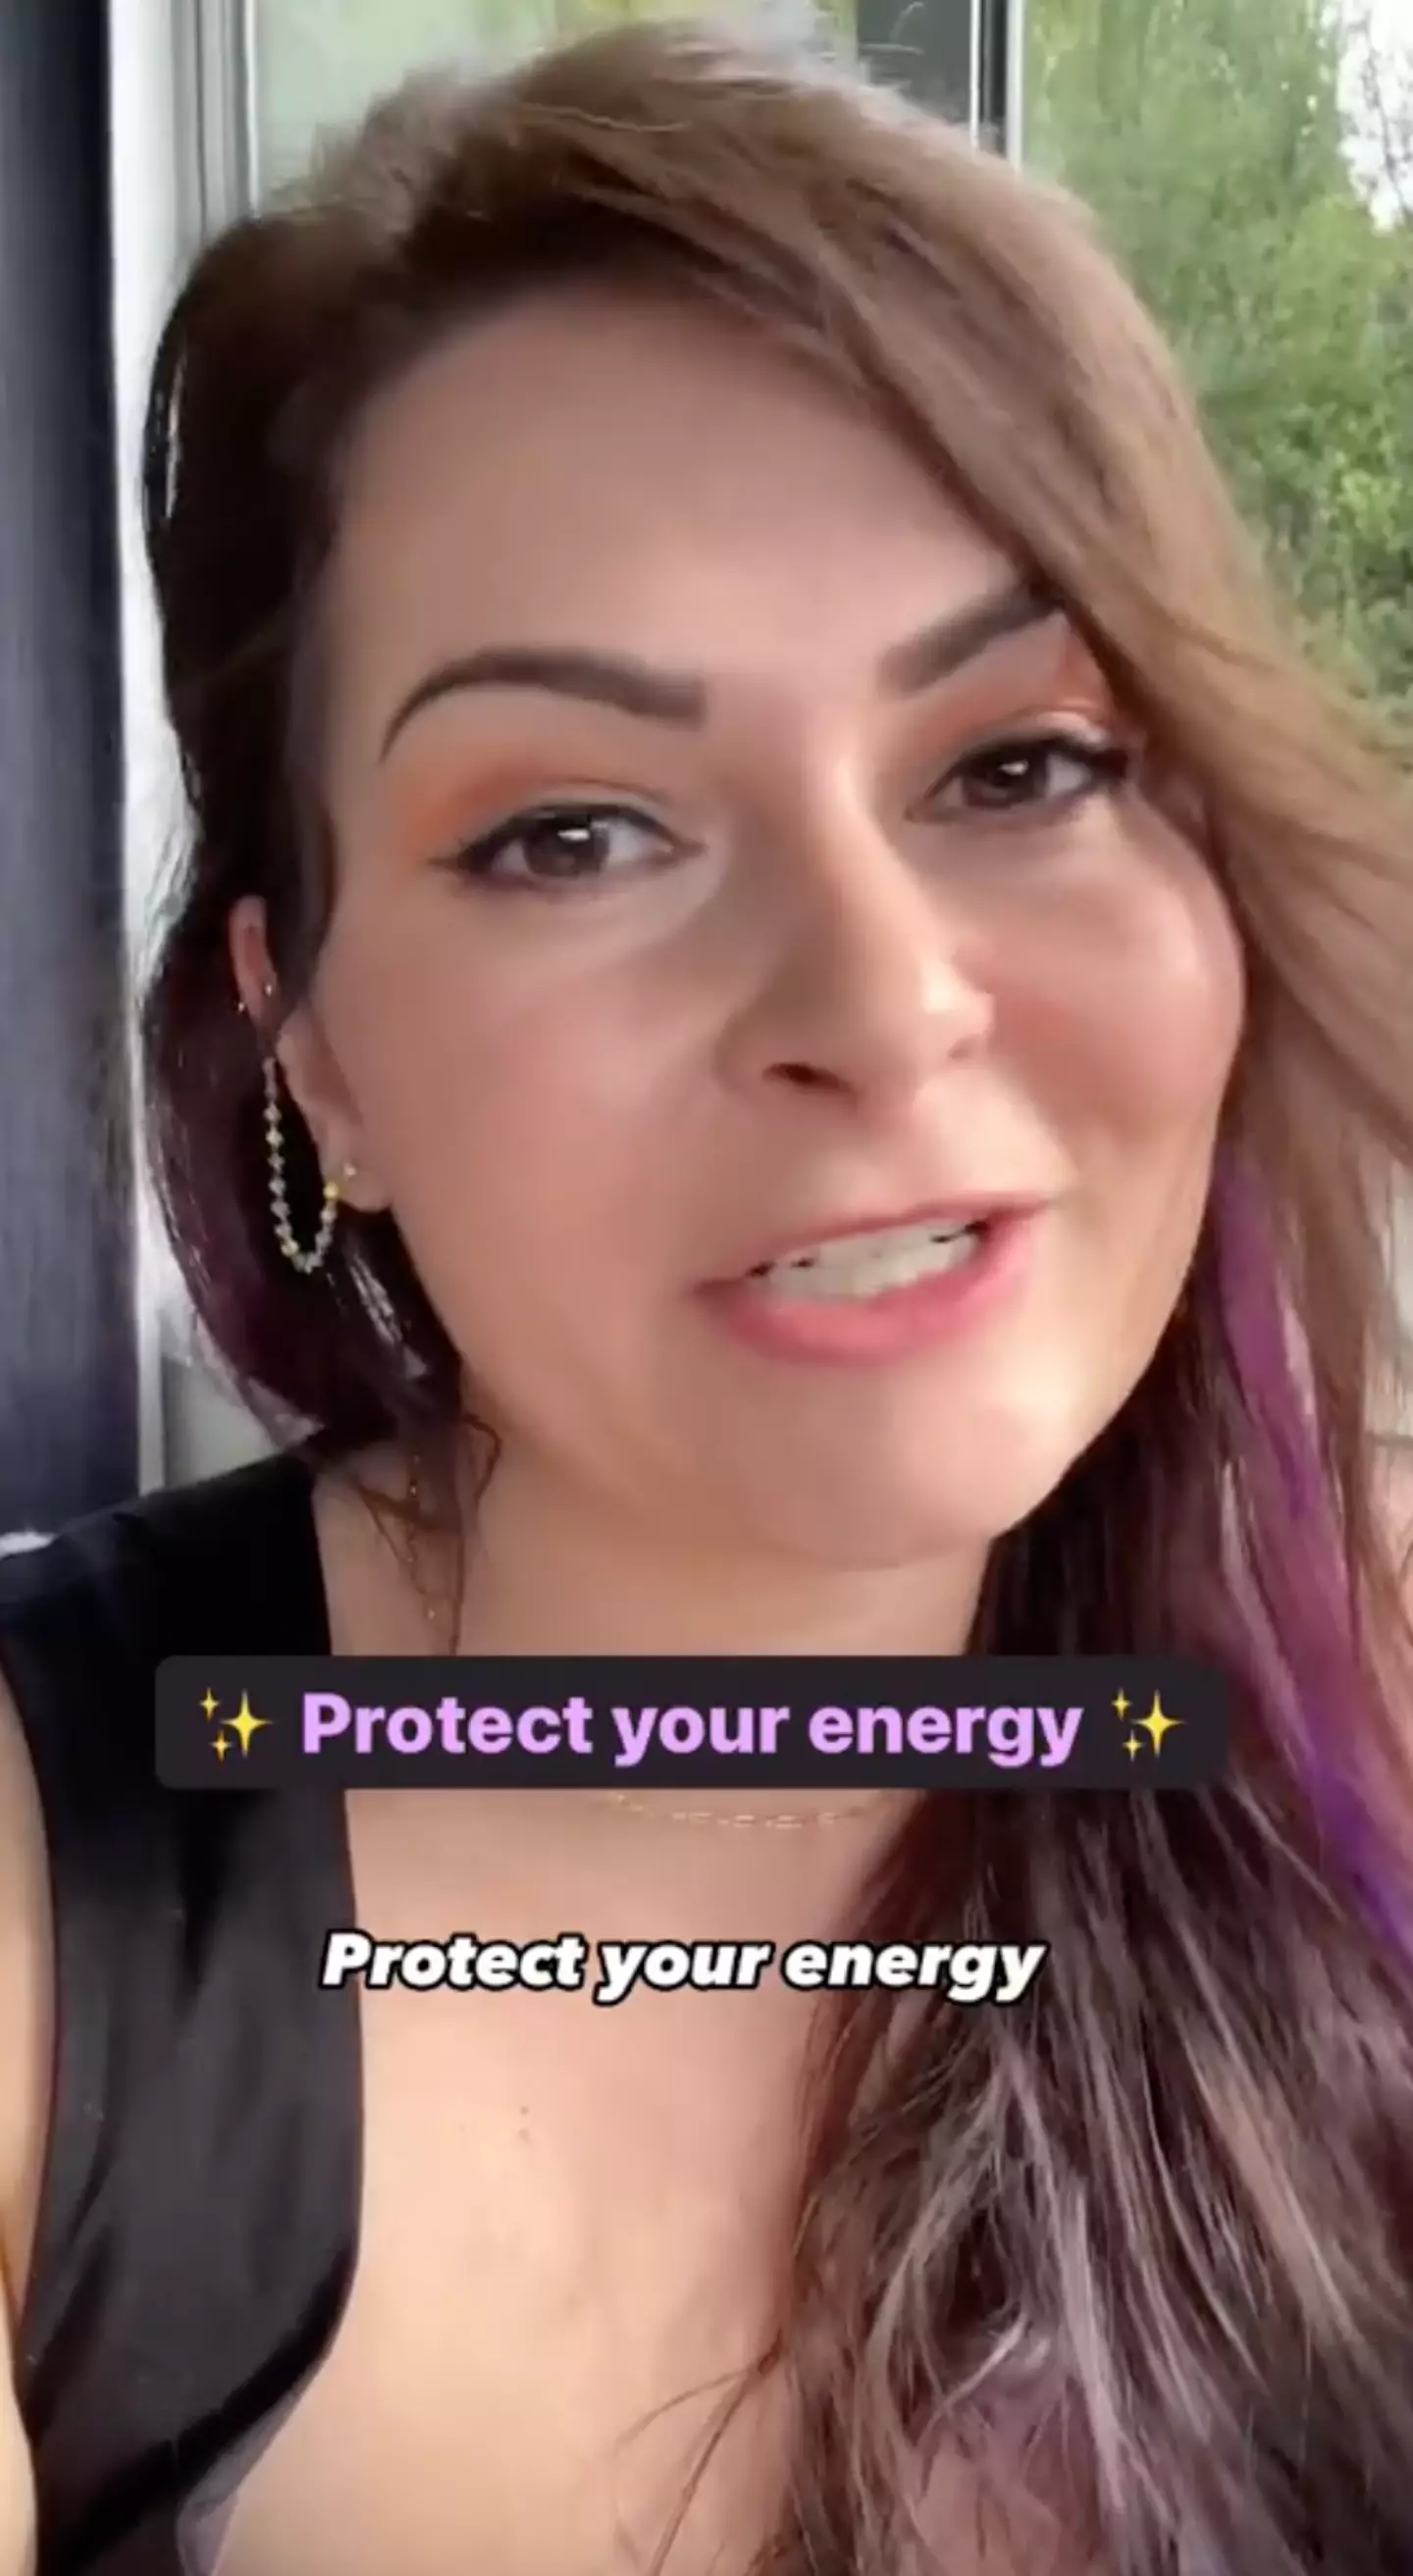 She’s suggested you ‘protect your energy’ to be a better worker in the long term.